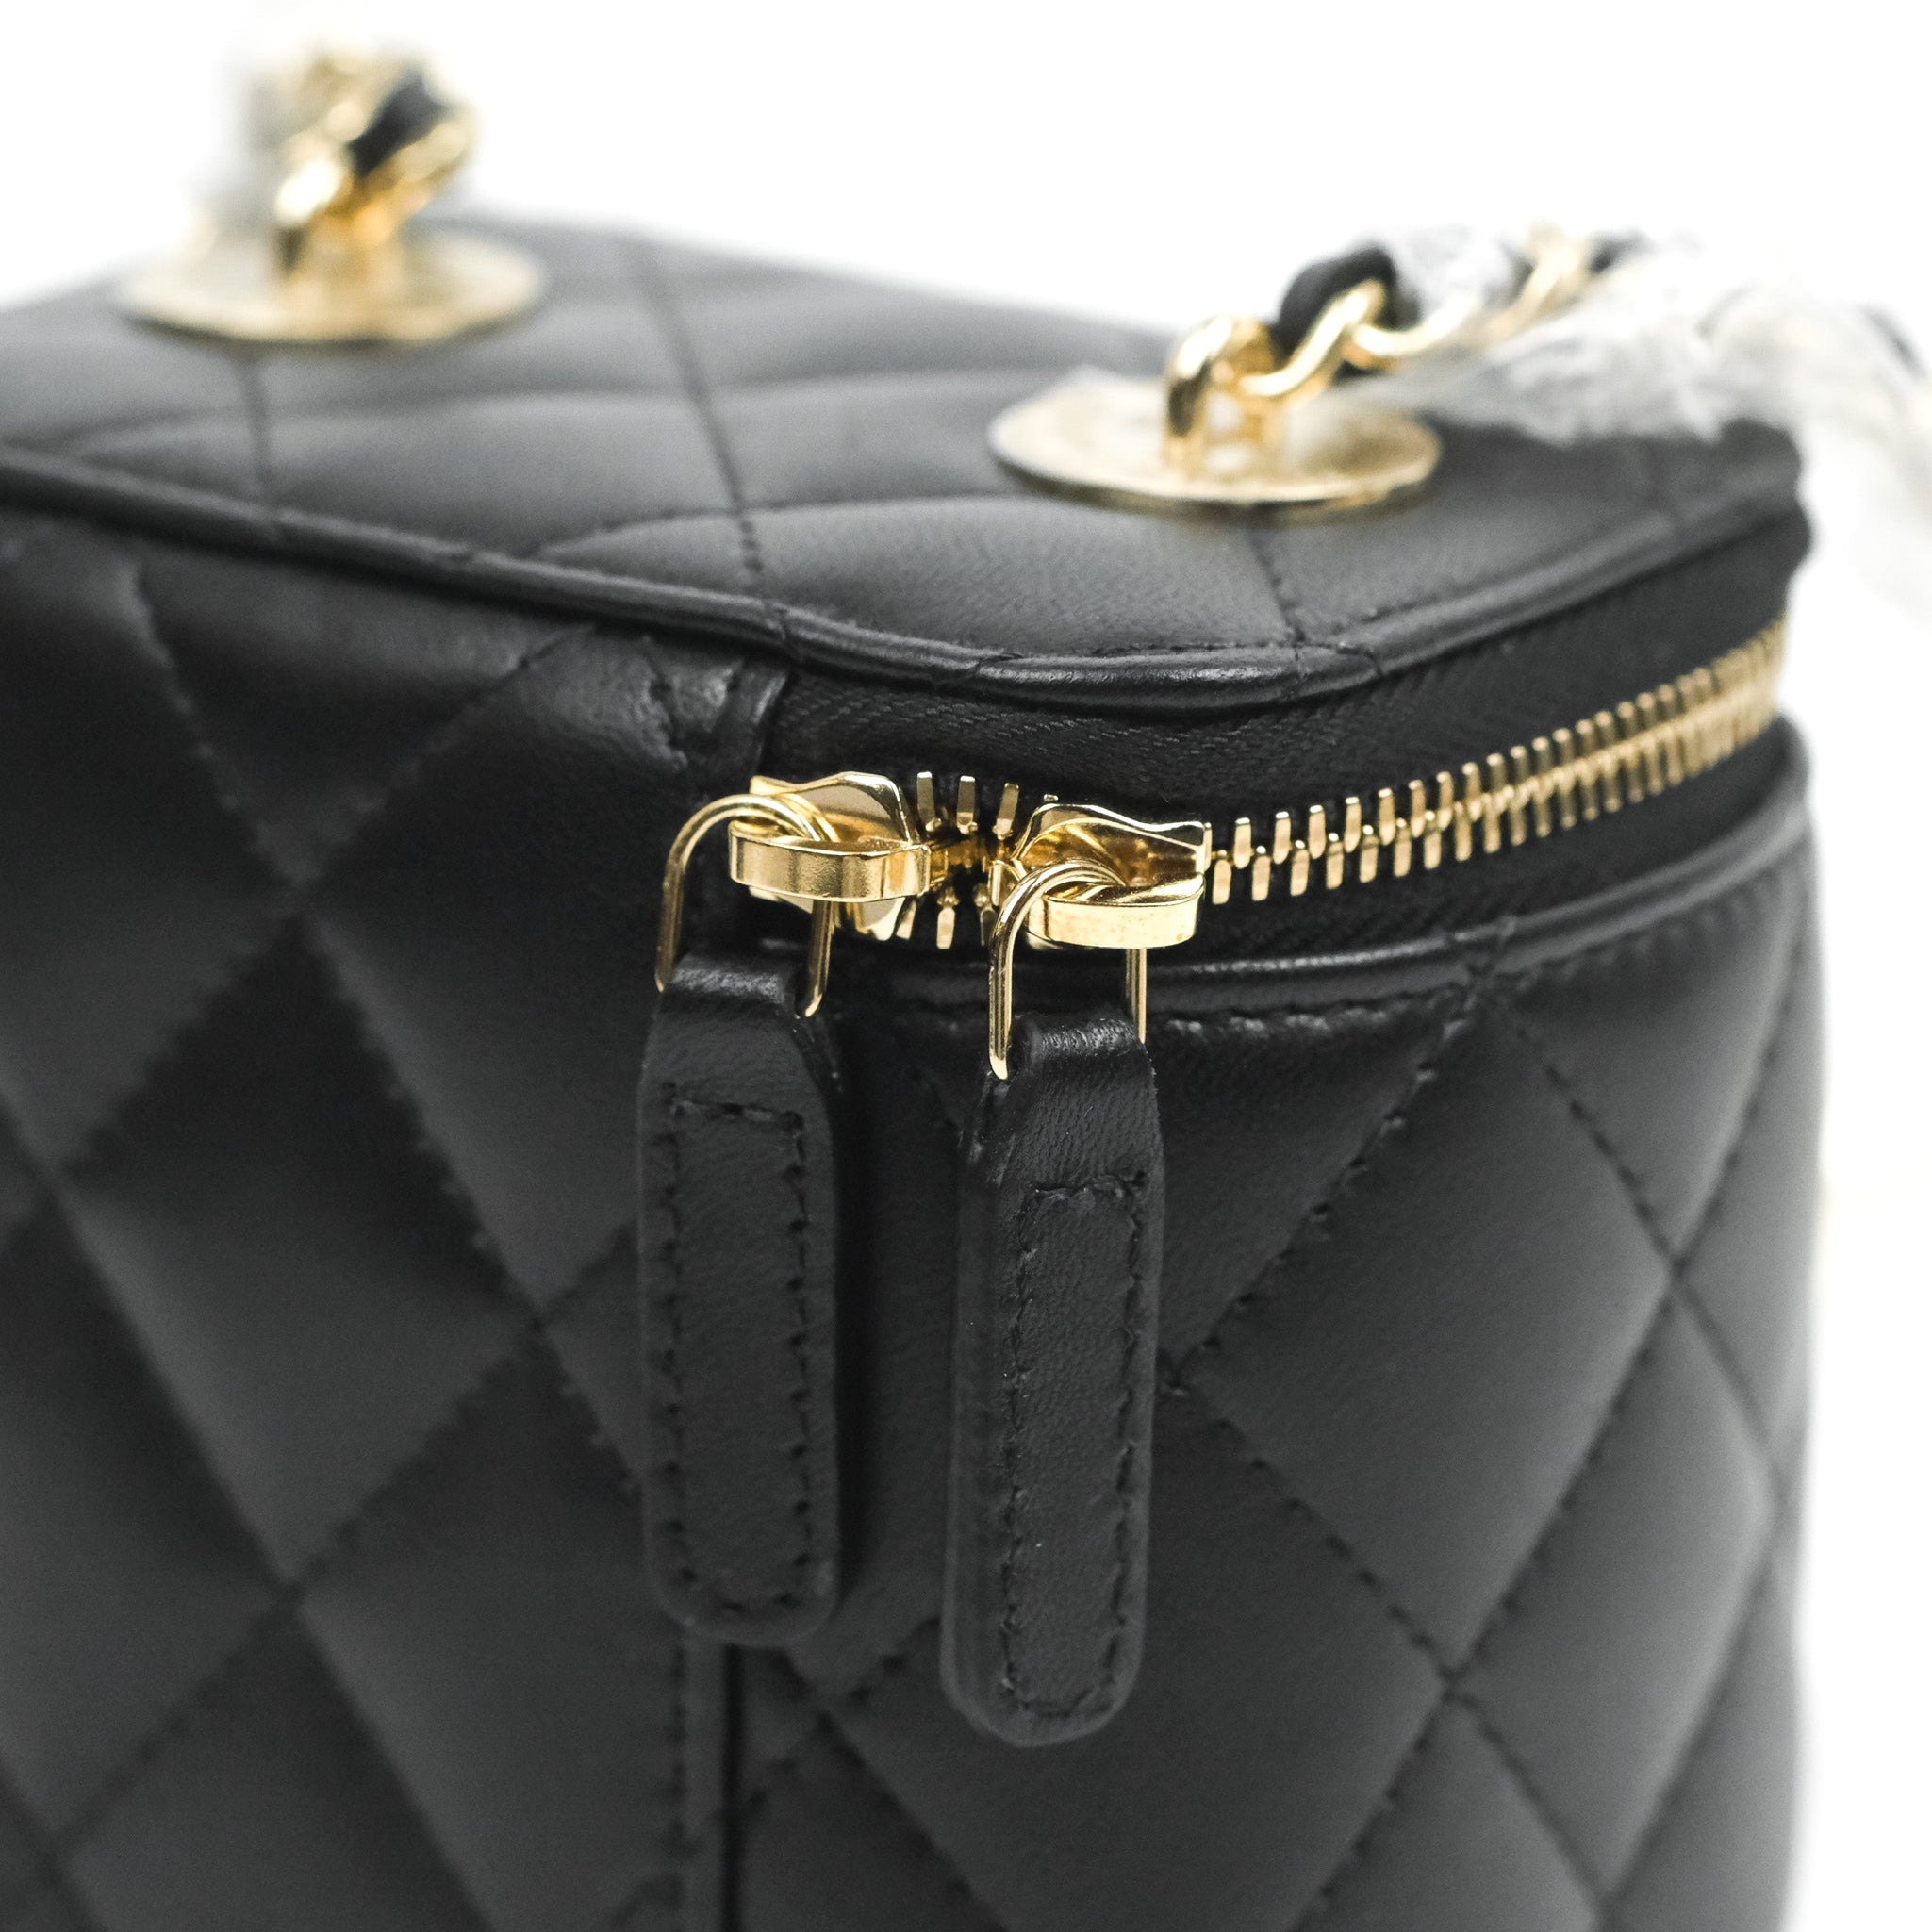 Chanel Black Quilted Grained Calfskin Small Vanity Case Gold Hardware, 2021, Womens Handbag